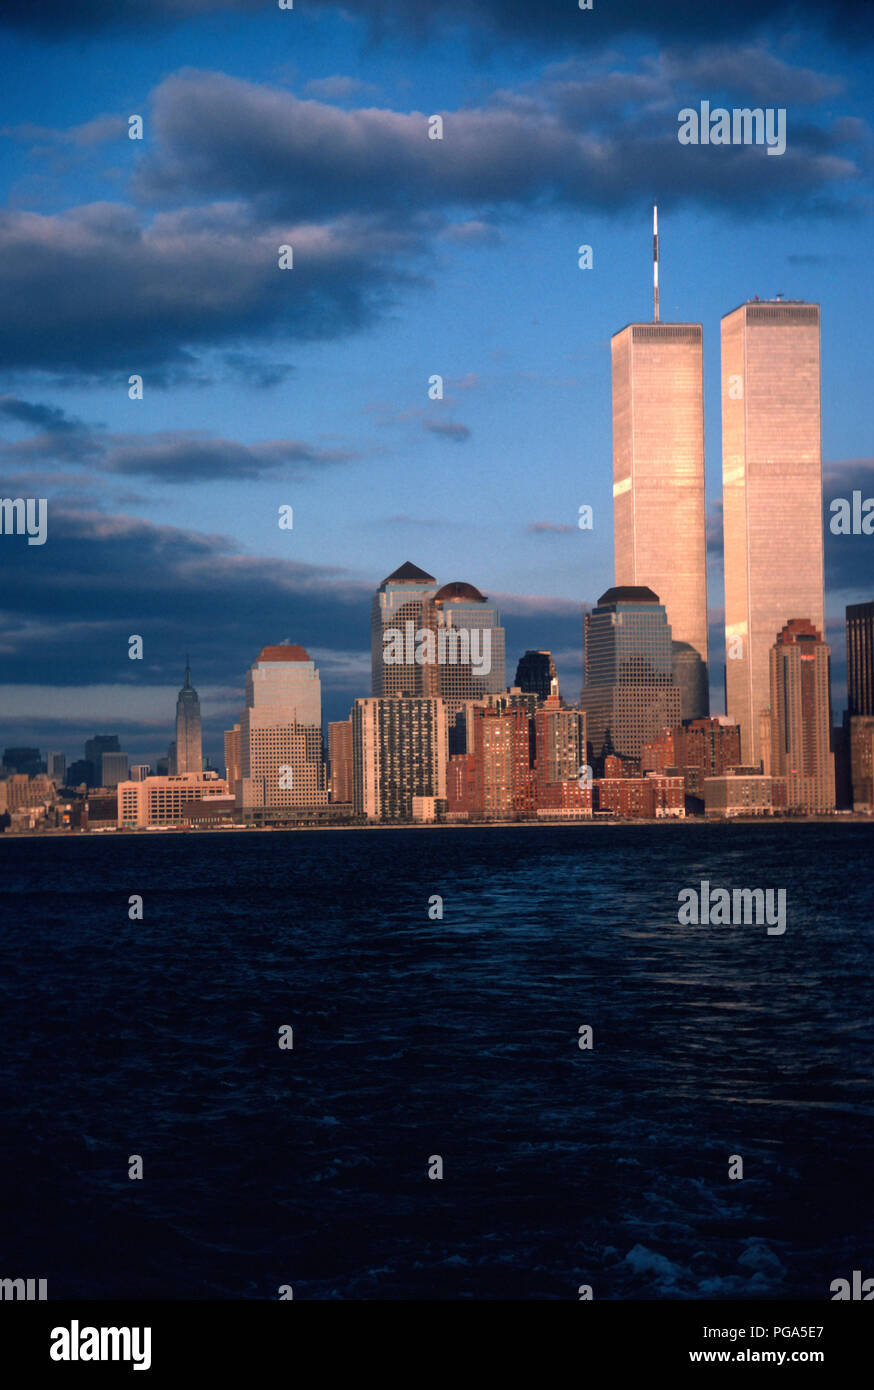 Vintage  1988 View of Lower Manhattan Skyline with Twin Towers of World Trade Center, NYC, USA Stock Photo